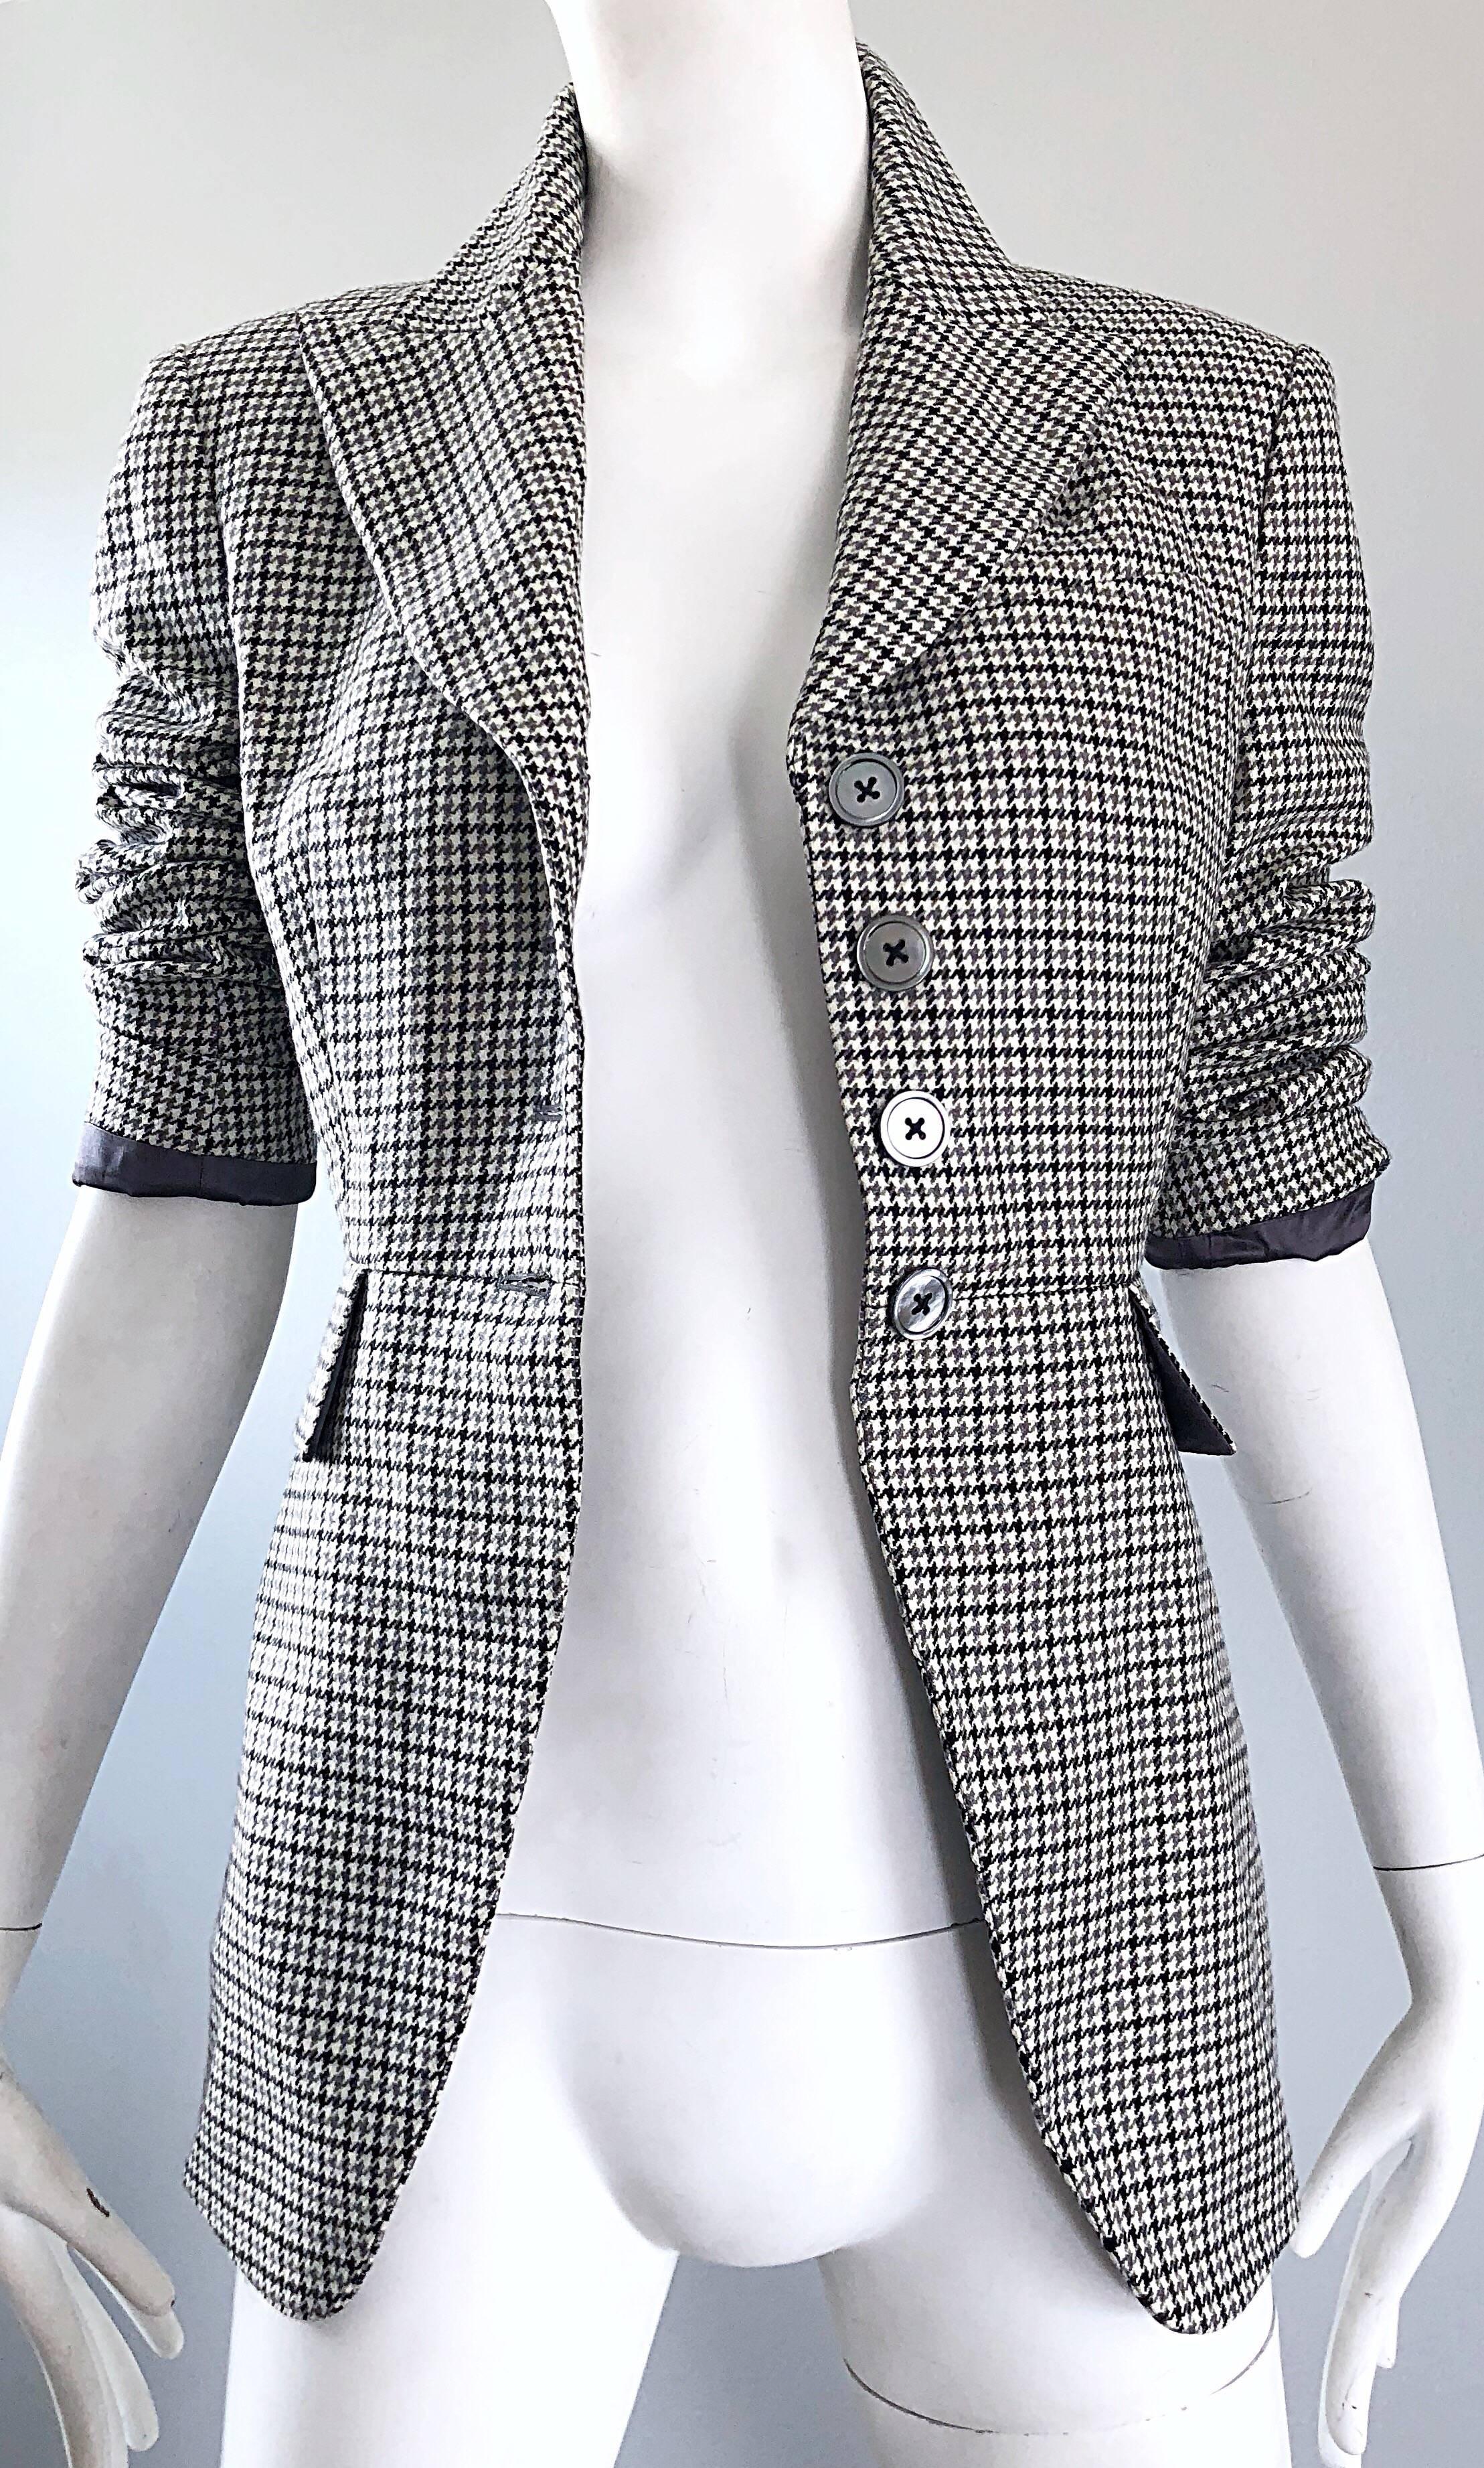 Michael Kors Collection 1990s Size 2 / 4 Gray + Black Houndstooth Blazer Jacket For Sale 4